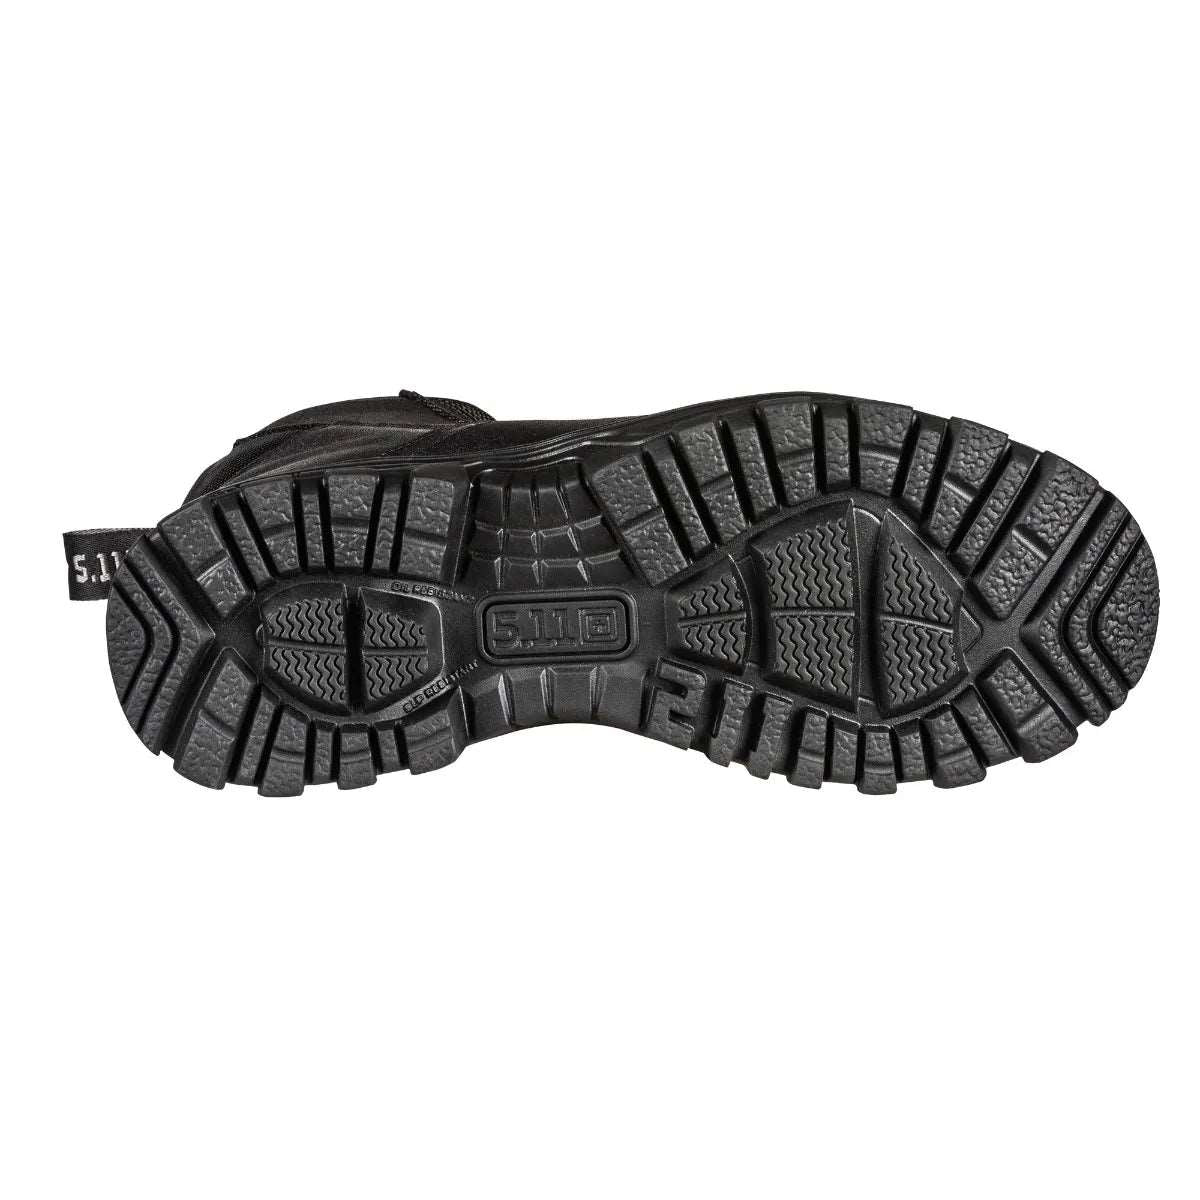 Safety Toe Boots - 5.11 Tactical Company 3.0 Carbon Tac Toe